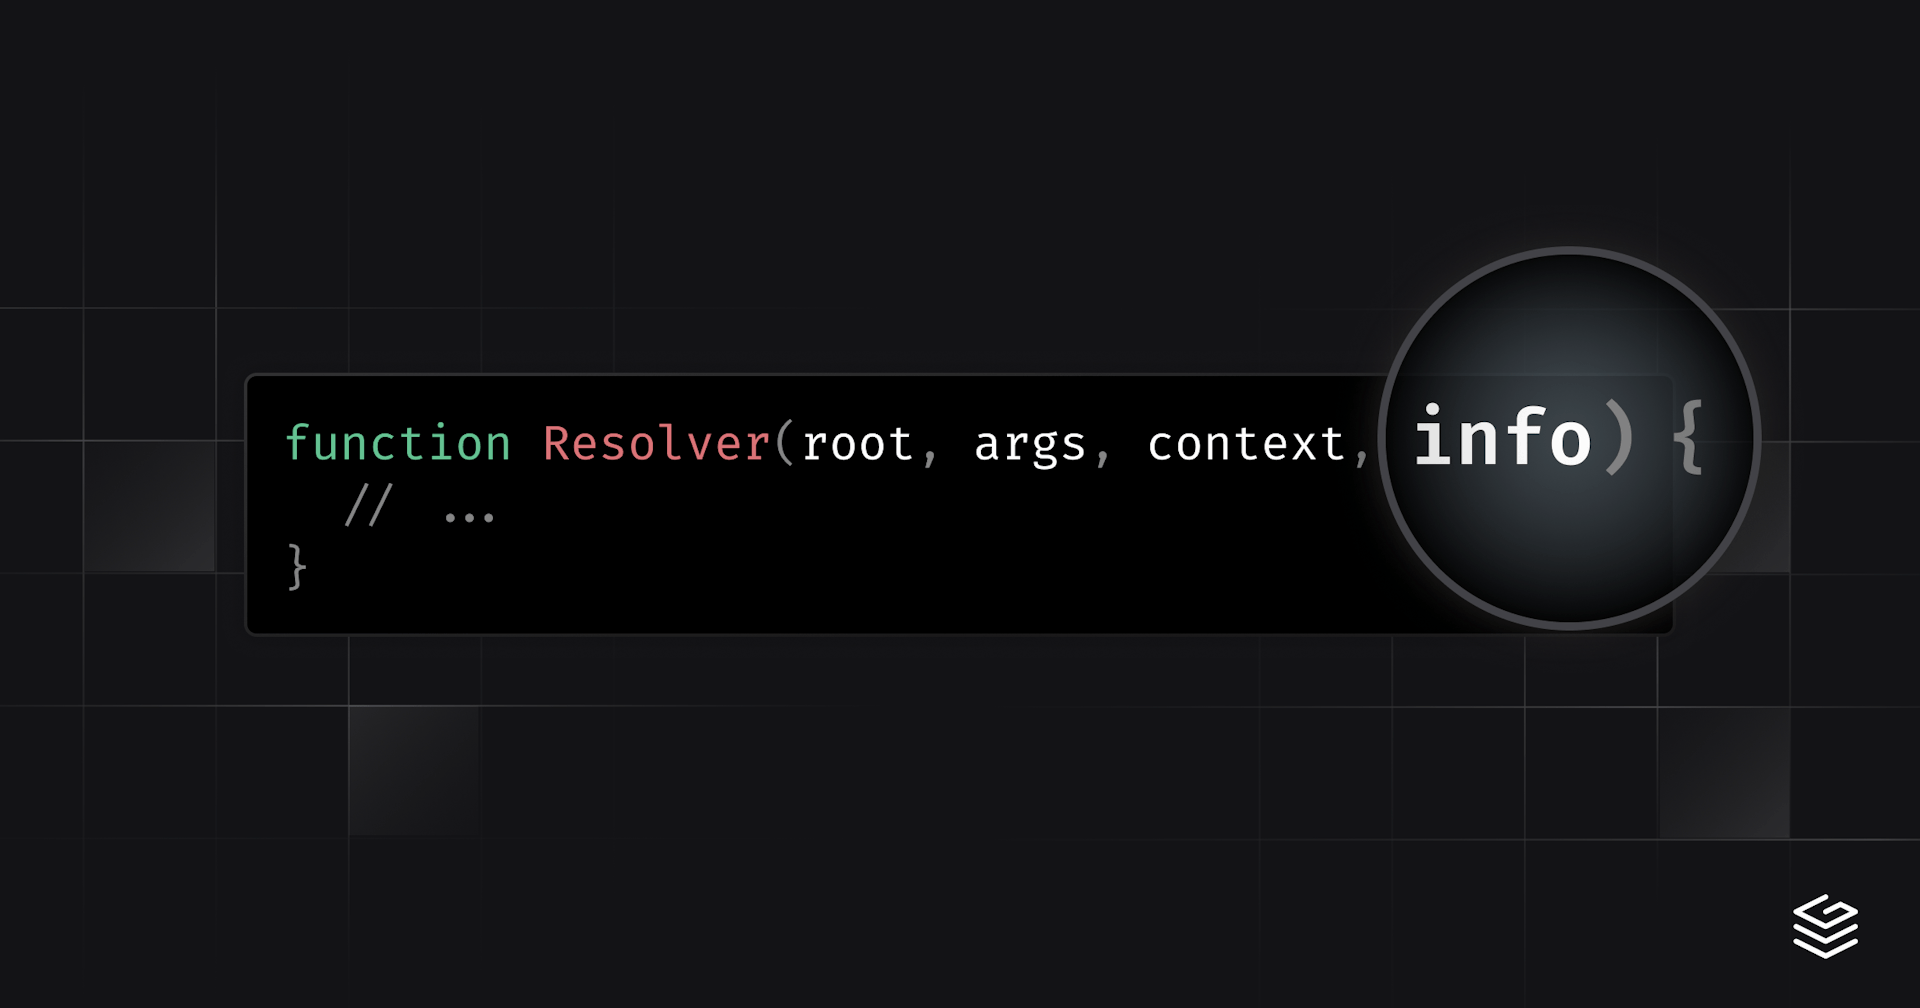 New info argument added to resolvers